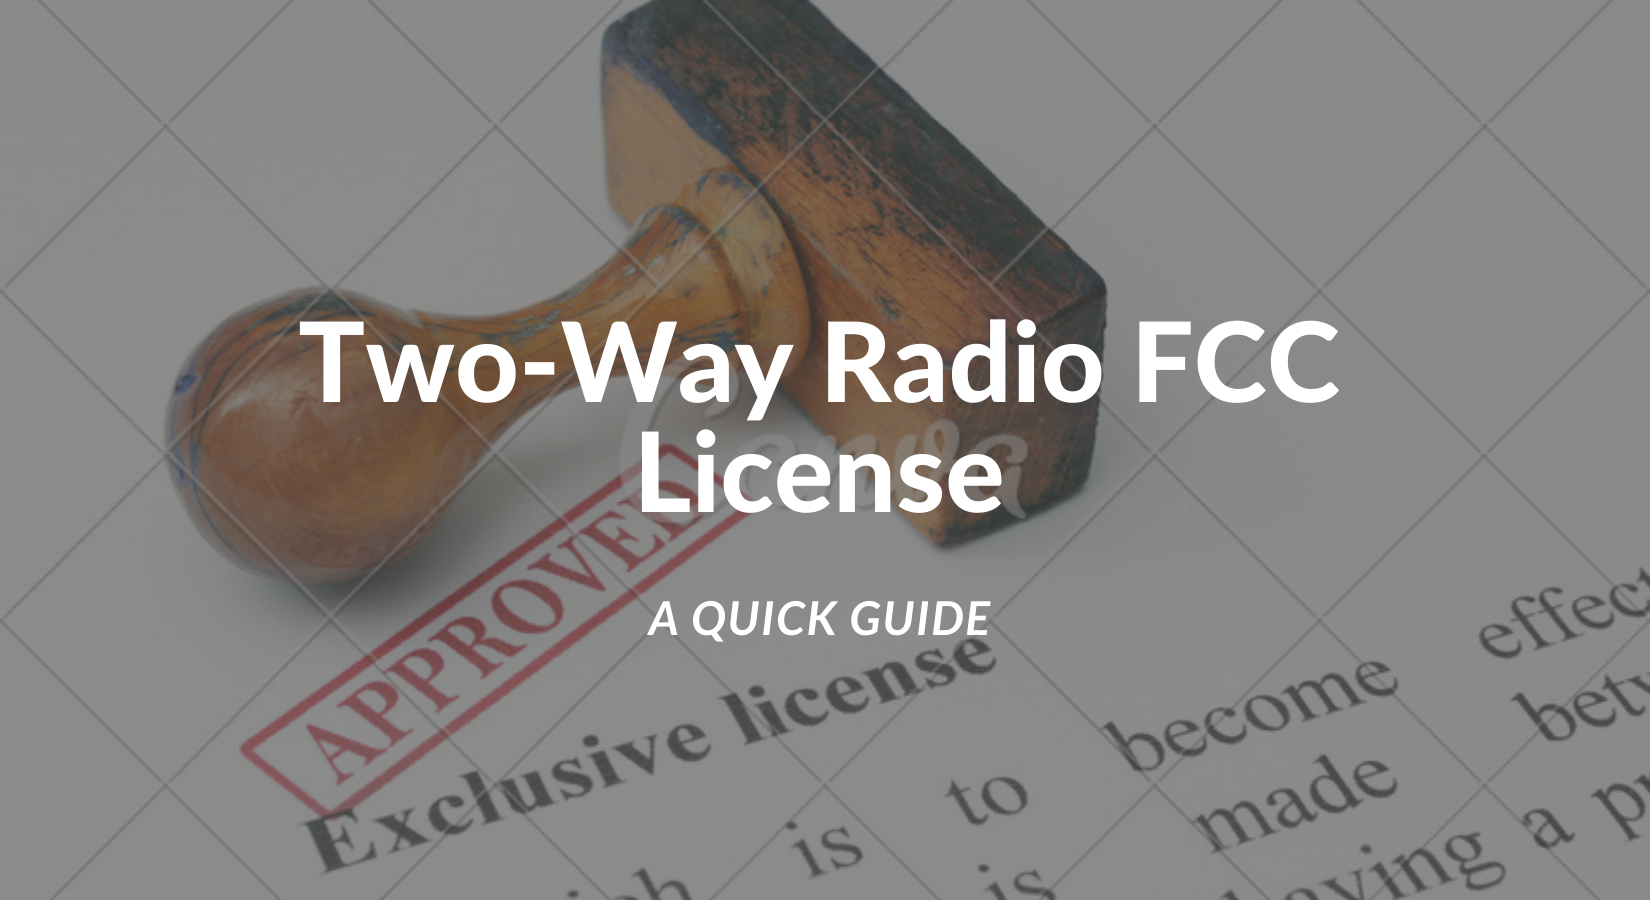 Getting Your Two-Way Radio FCC License